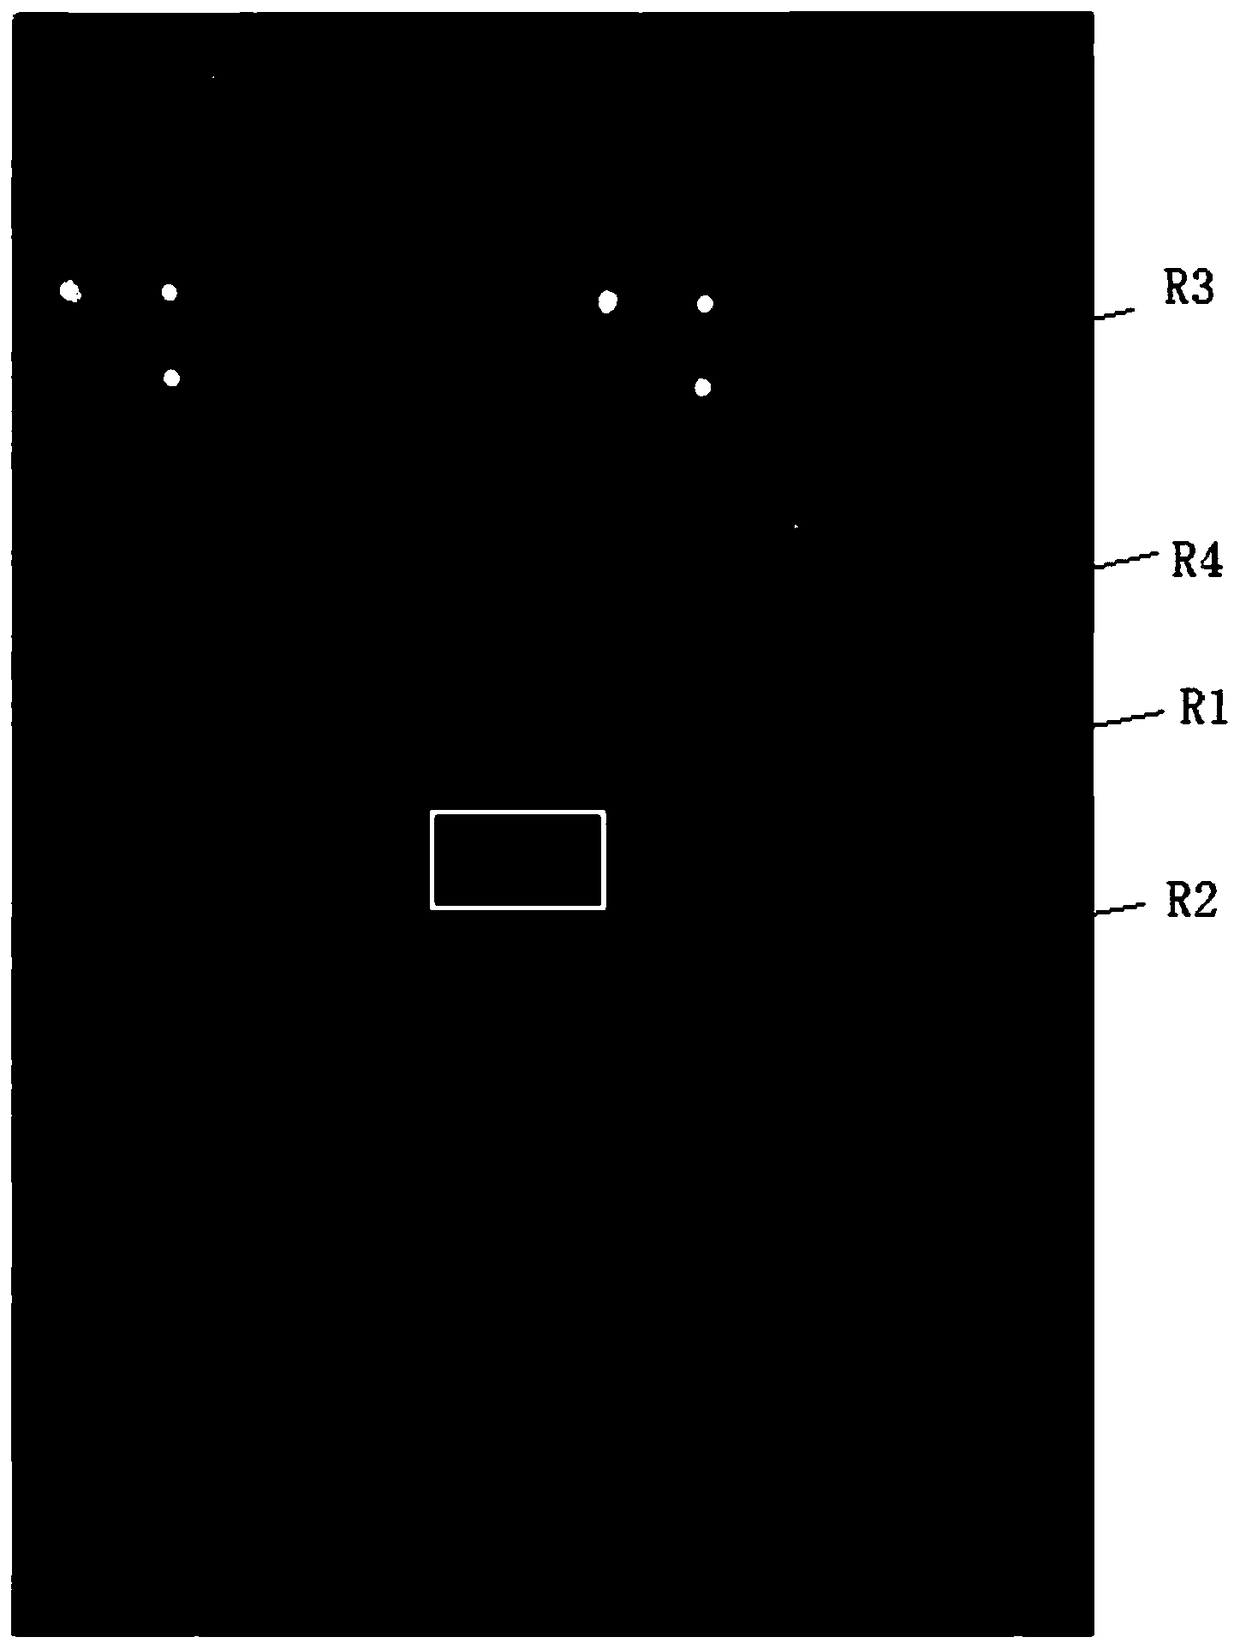 A method for automatic detection of partial discharge in switchgear based on multi-vision system